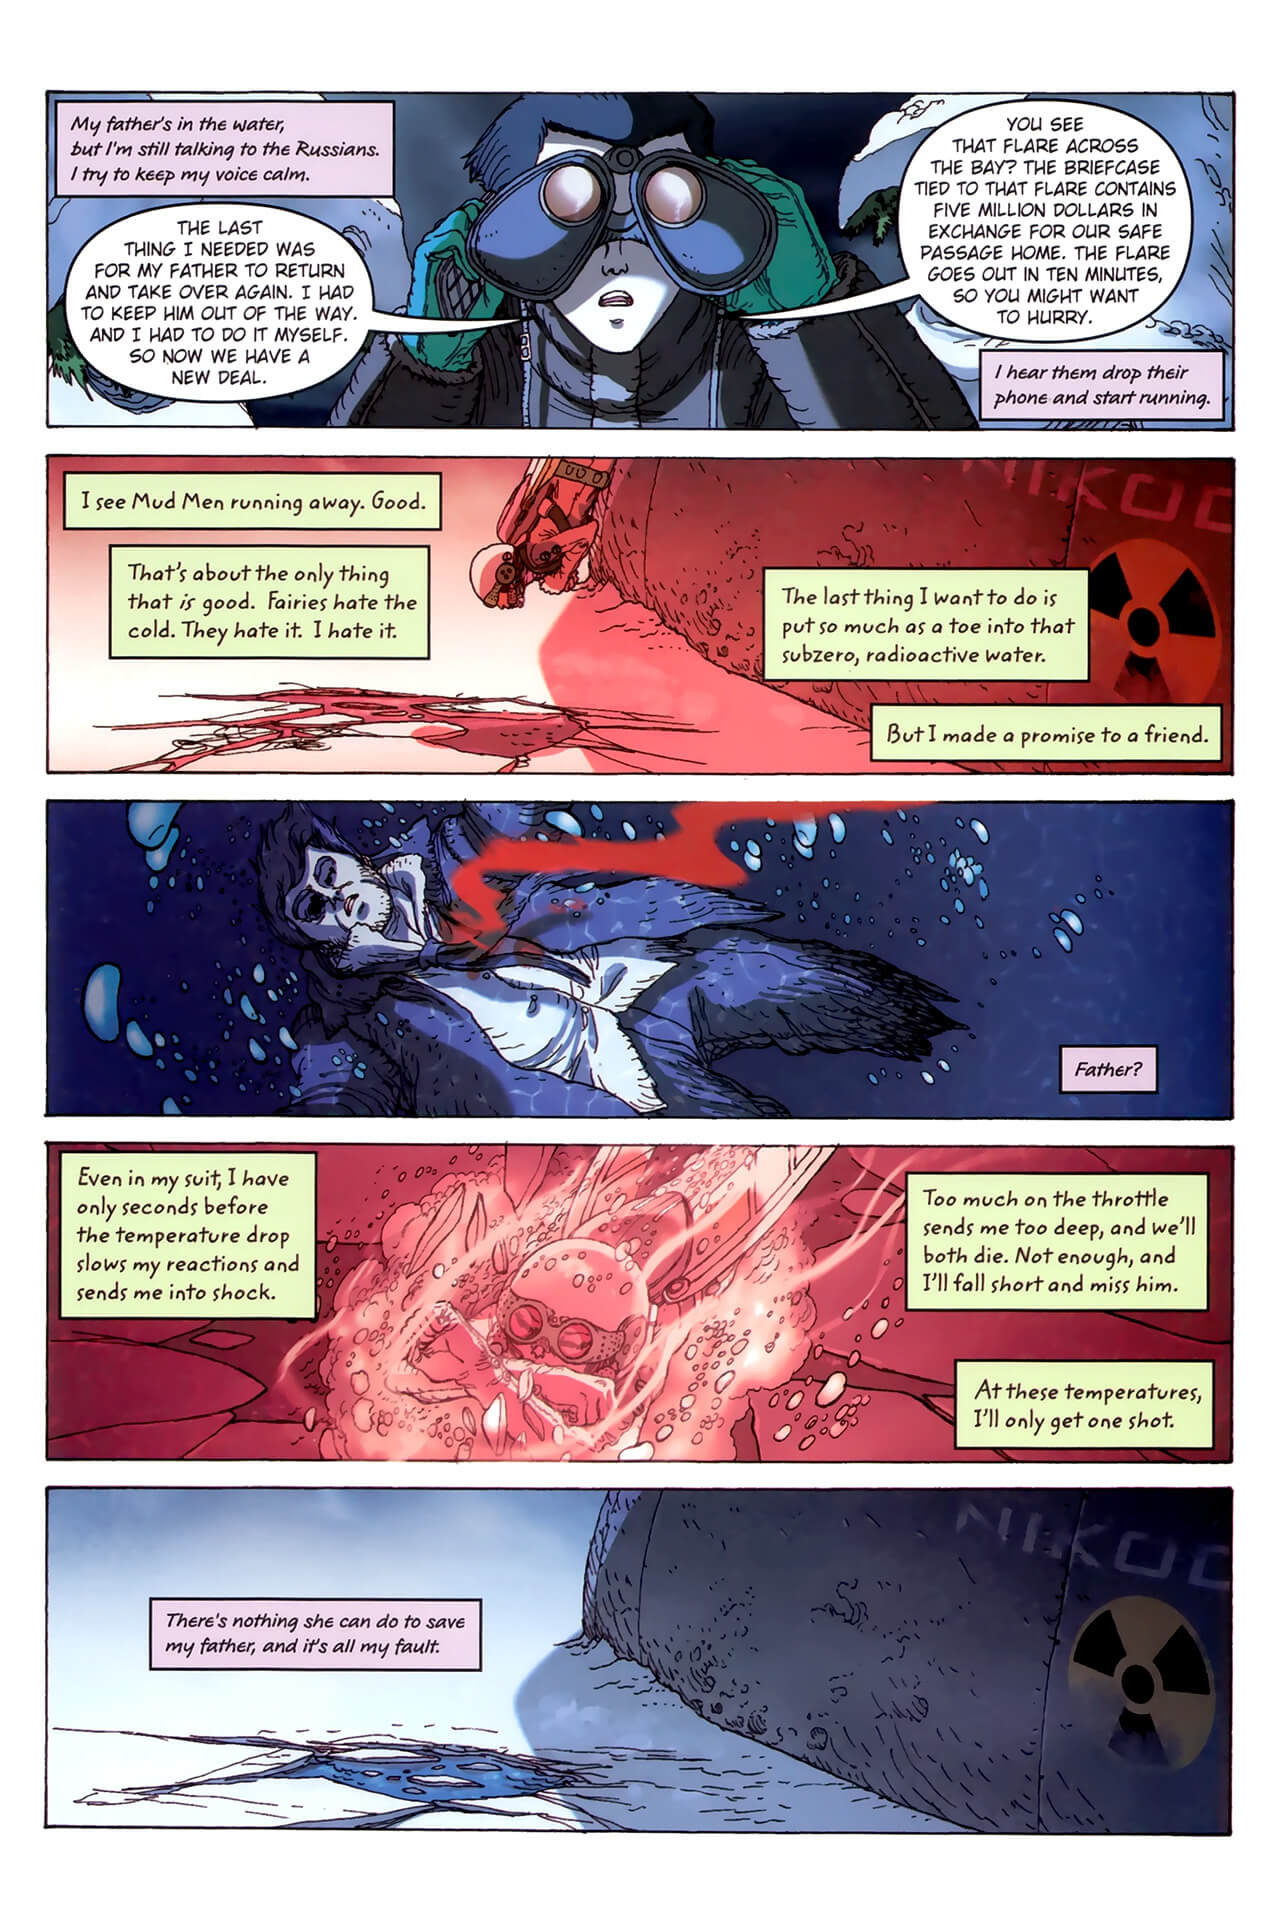 page 119 of artemis fowl the arctic incident graphic novel